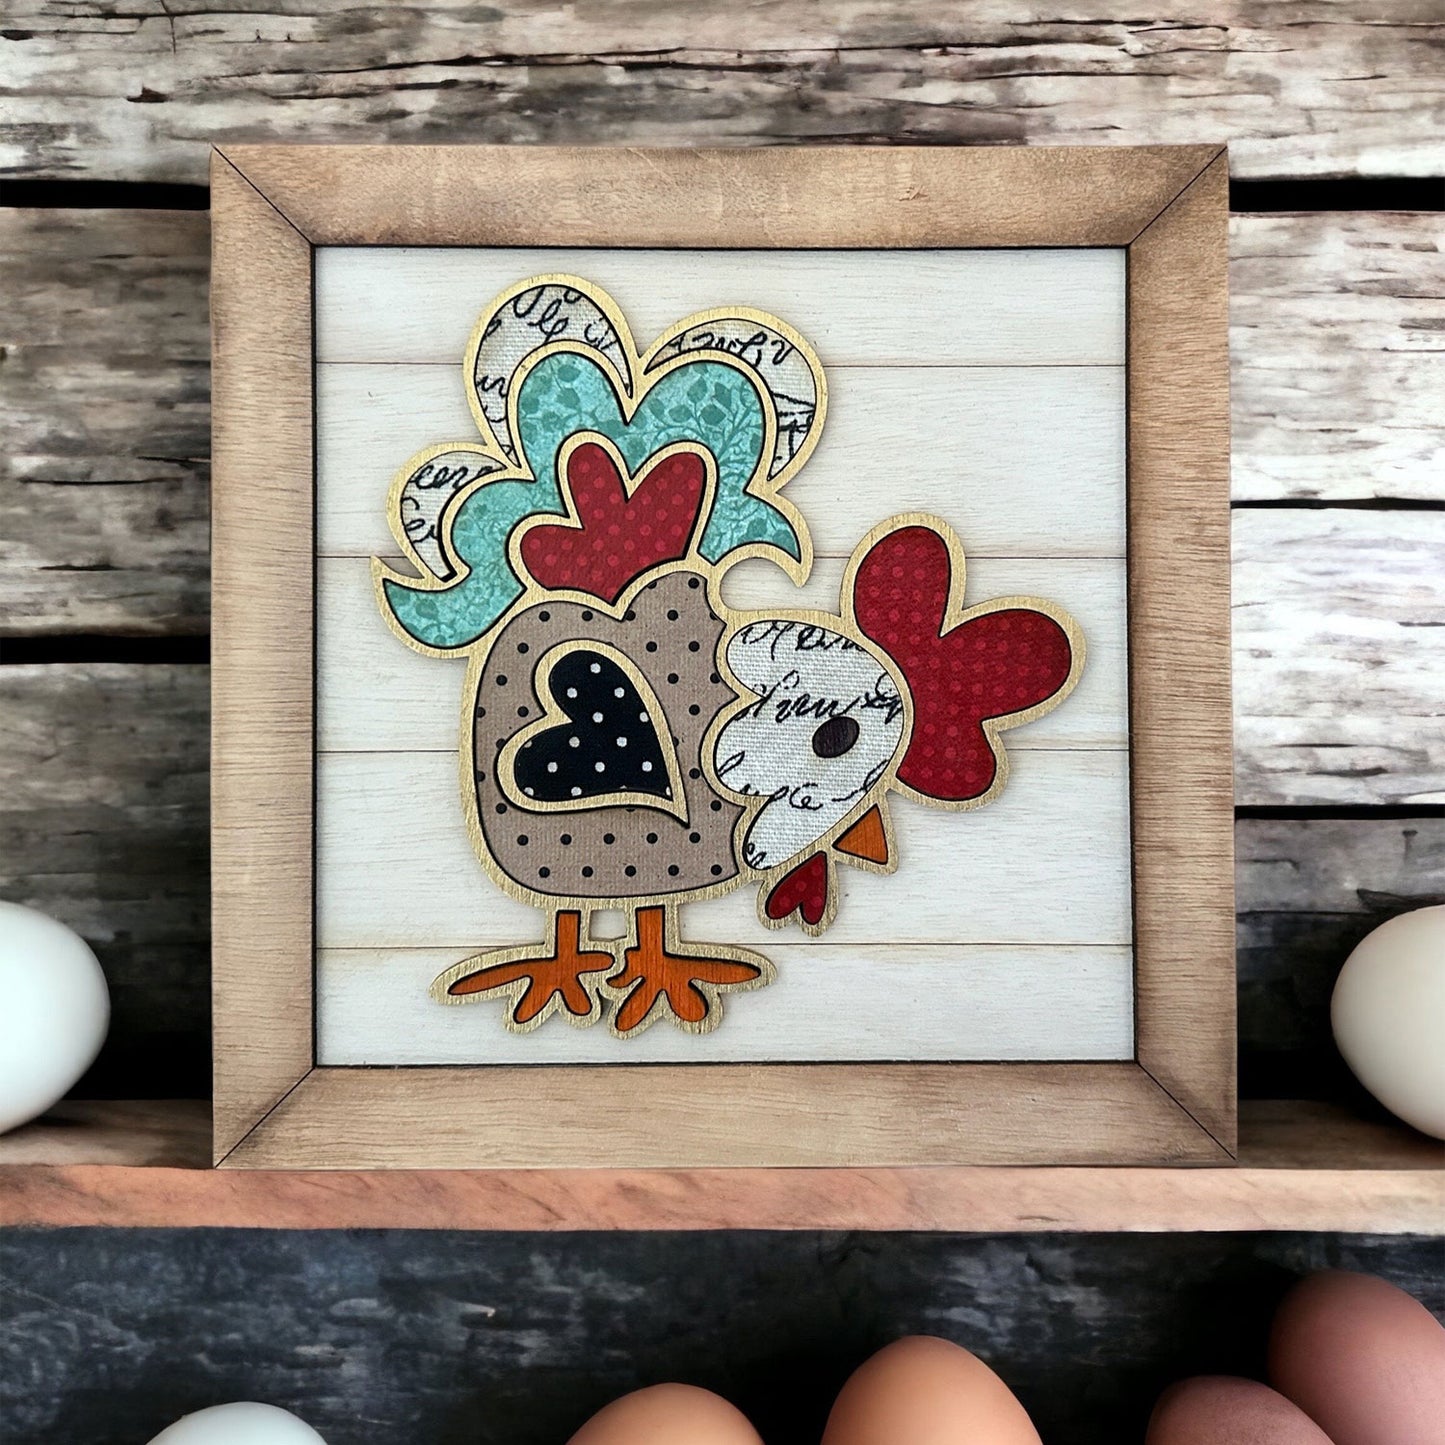 Whimsical Chicken Sign with Faux Shiplap and Farmhouse Frame 8x8 in. Ver. 2